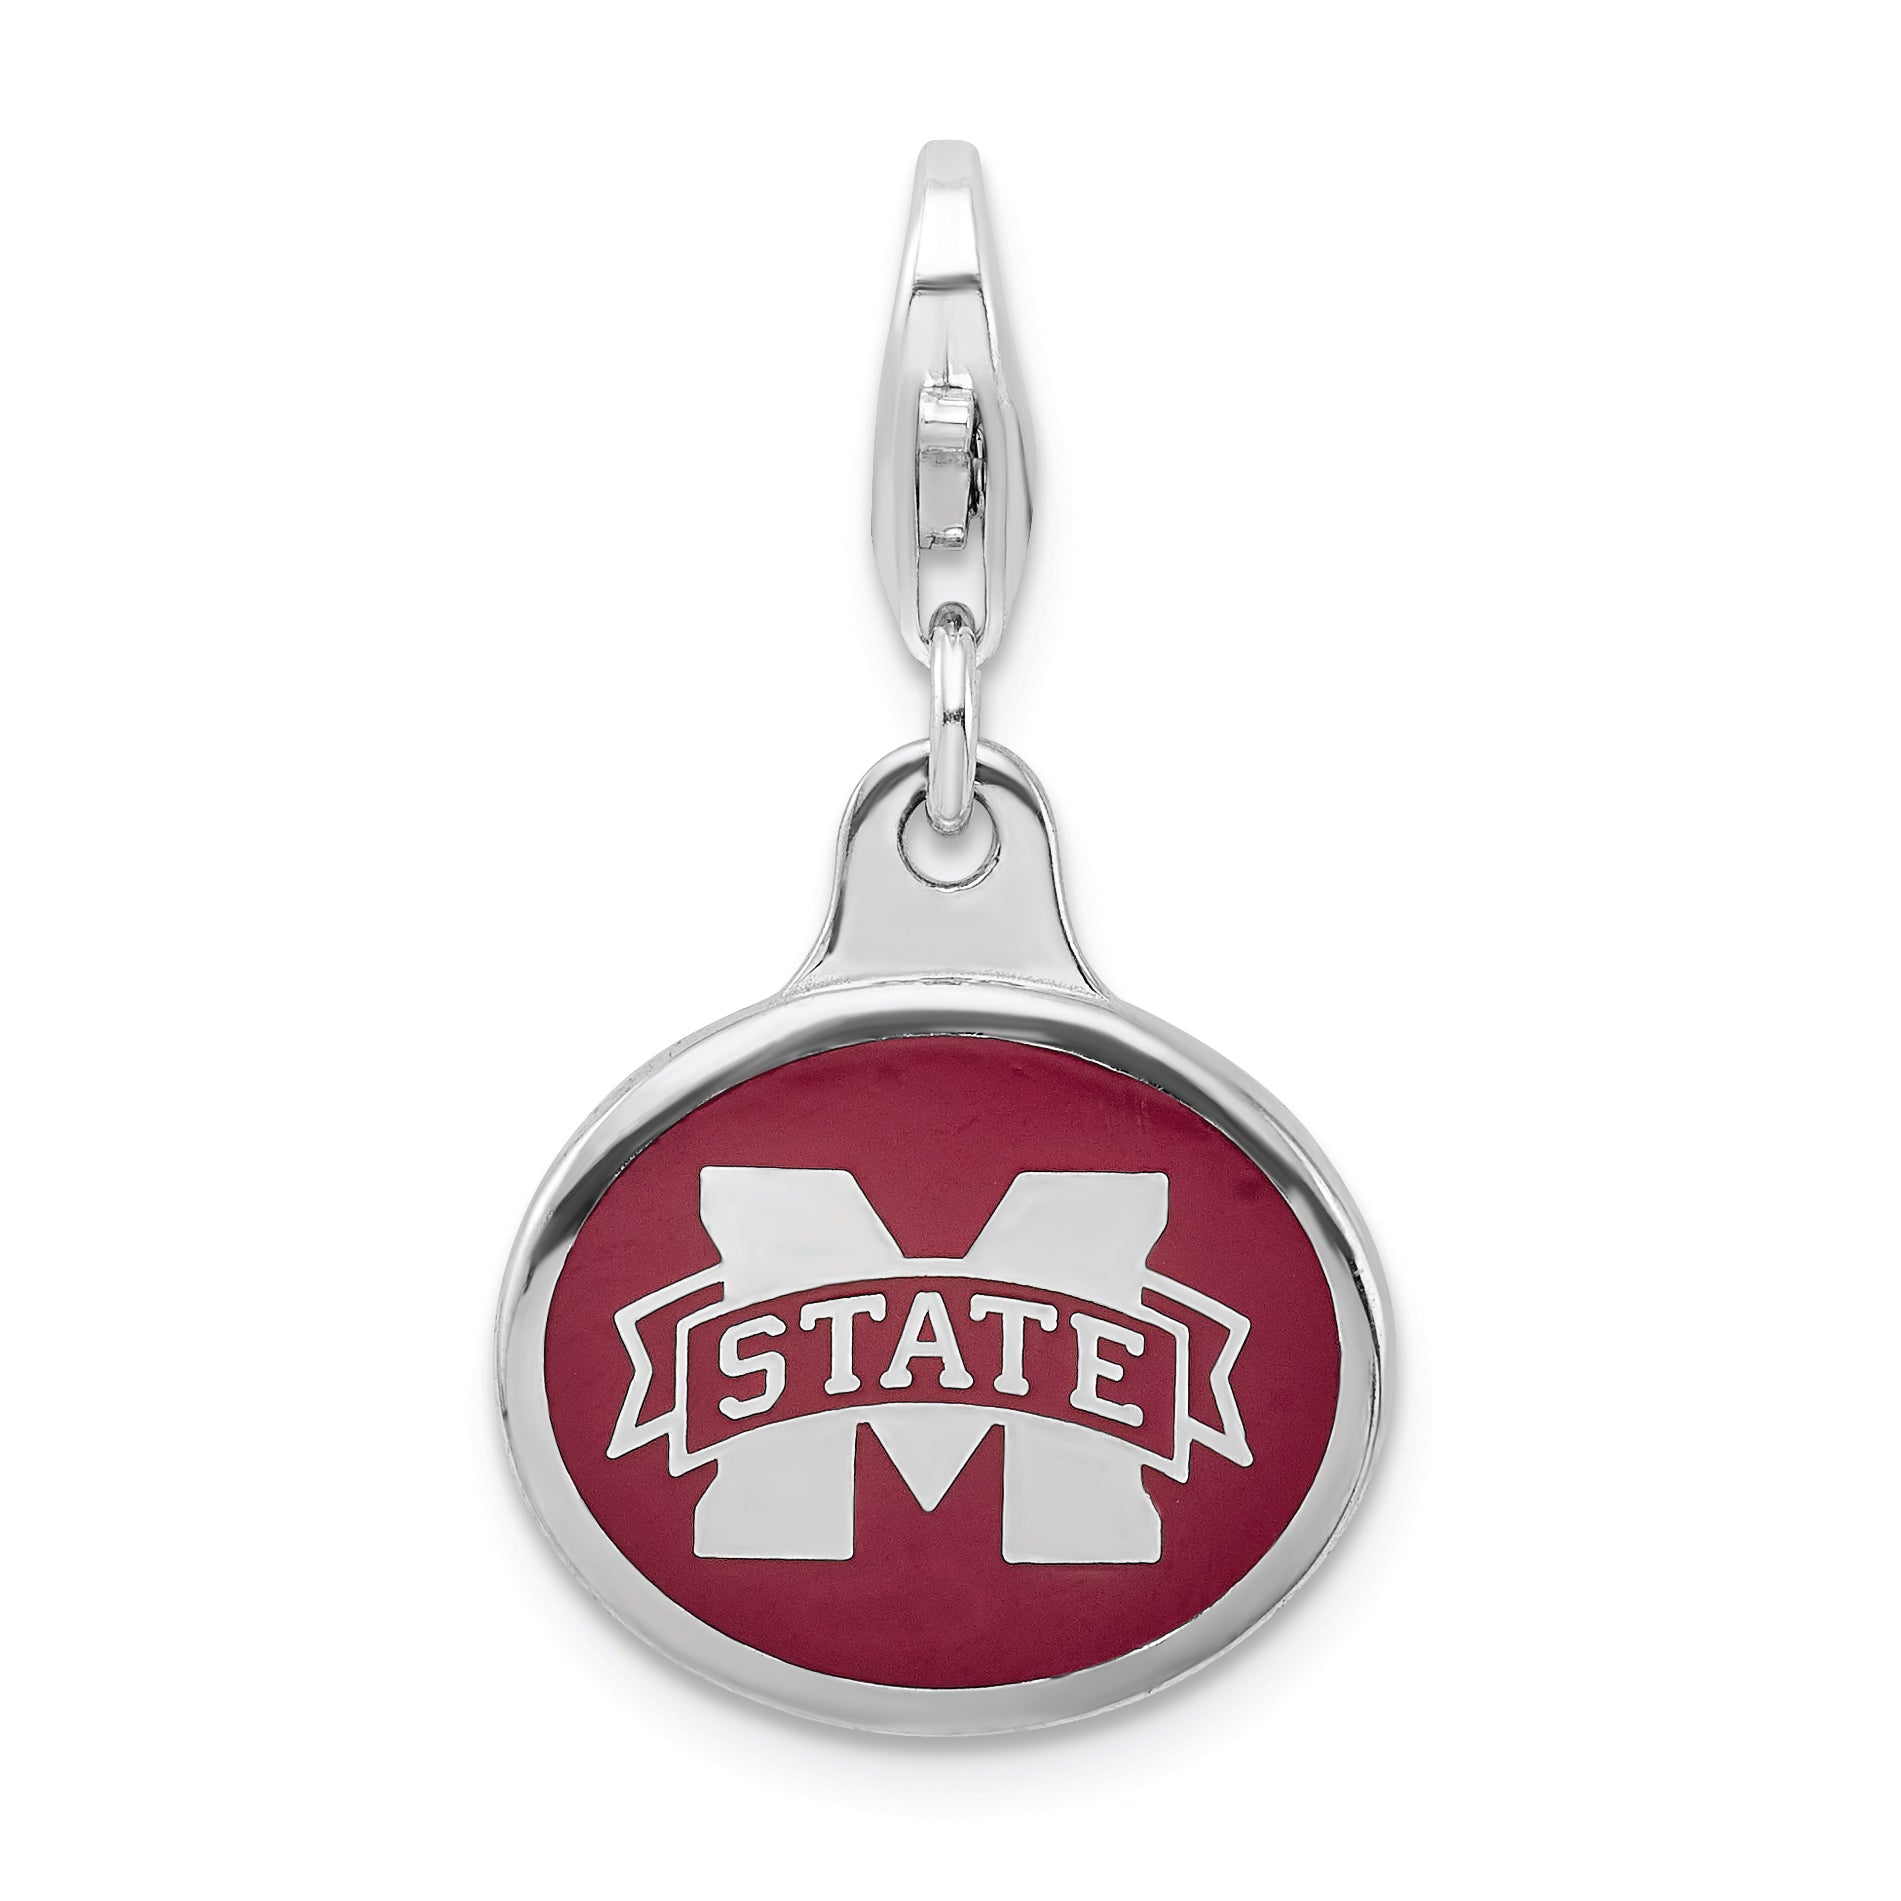 Amore La Vita Sterling Silver Rhodium-plated Polished Enameled Mississippi State University Charm with Fancy Lobster Clasp